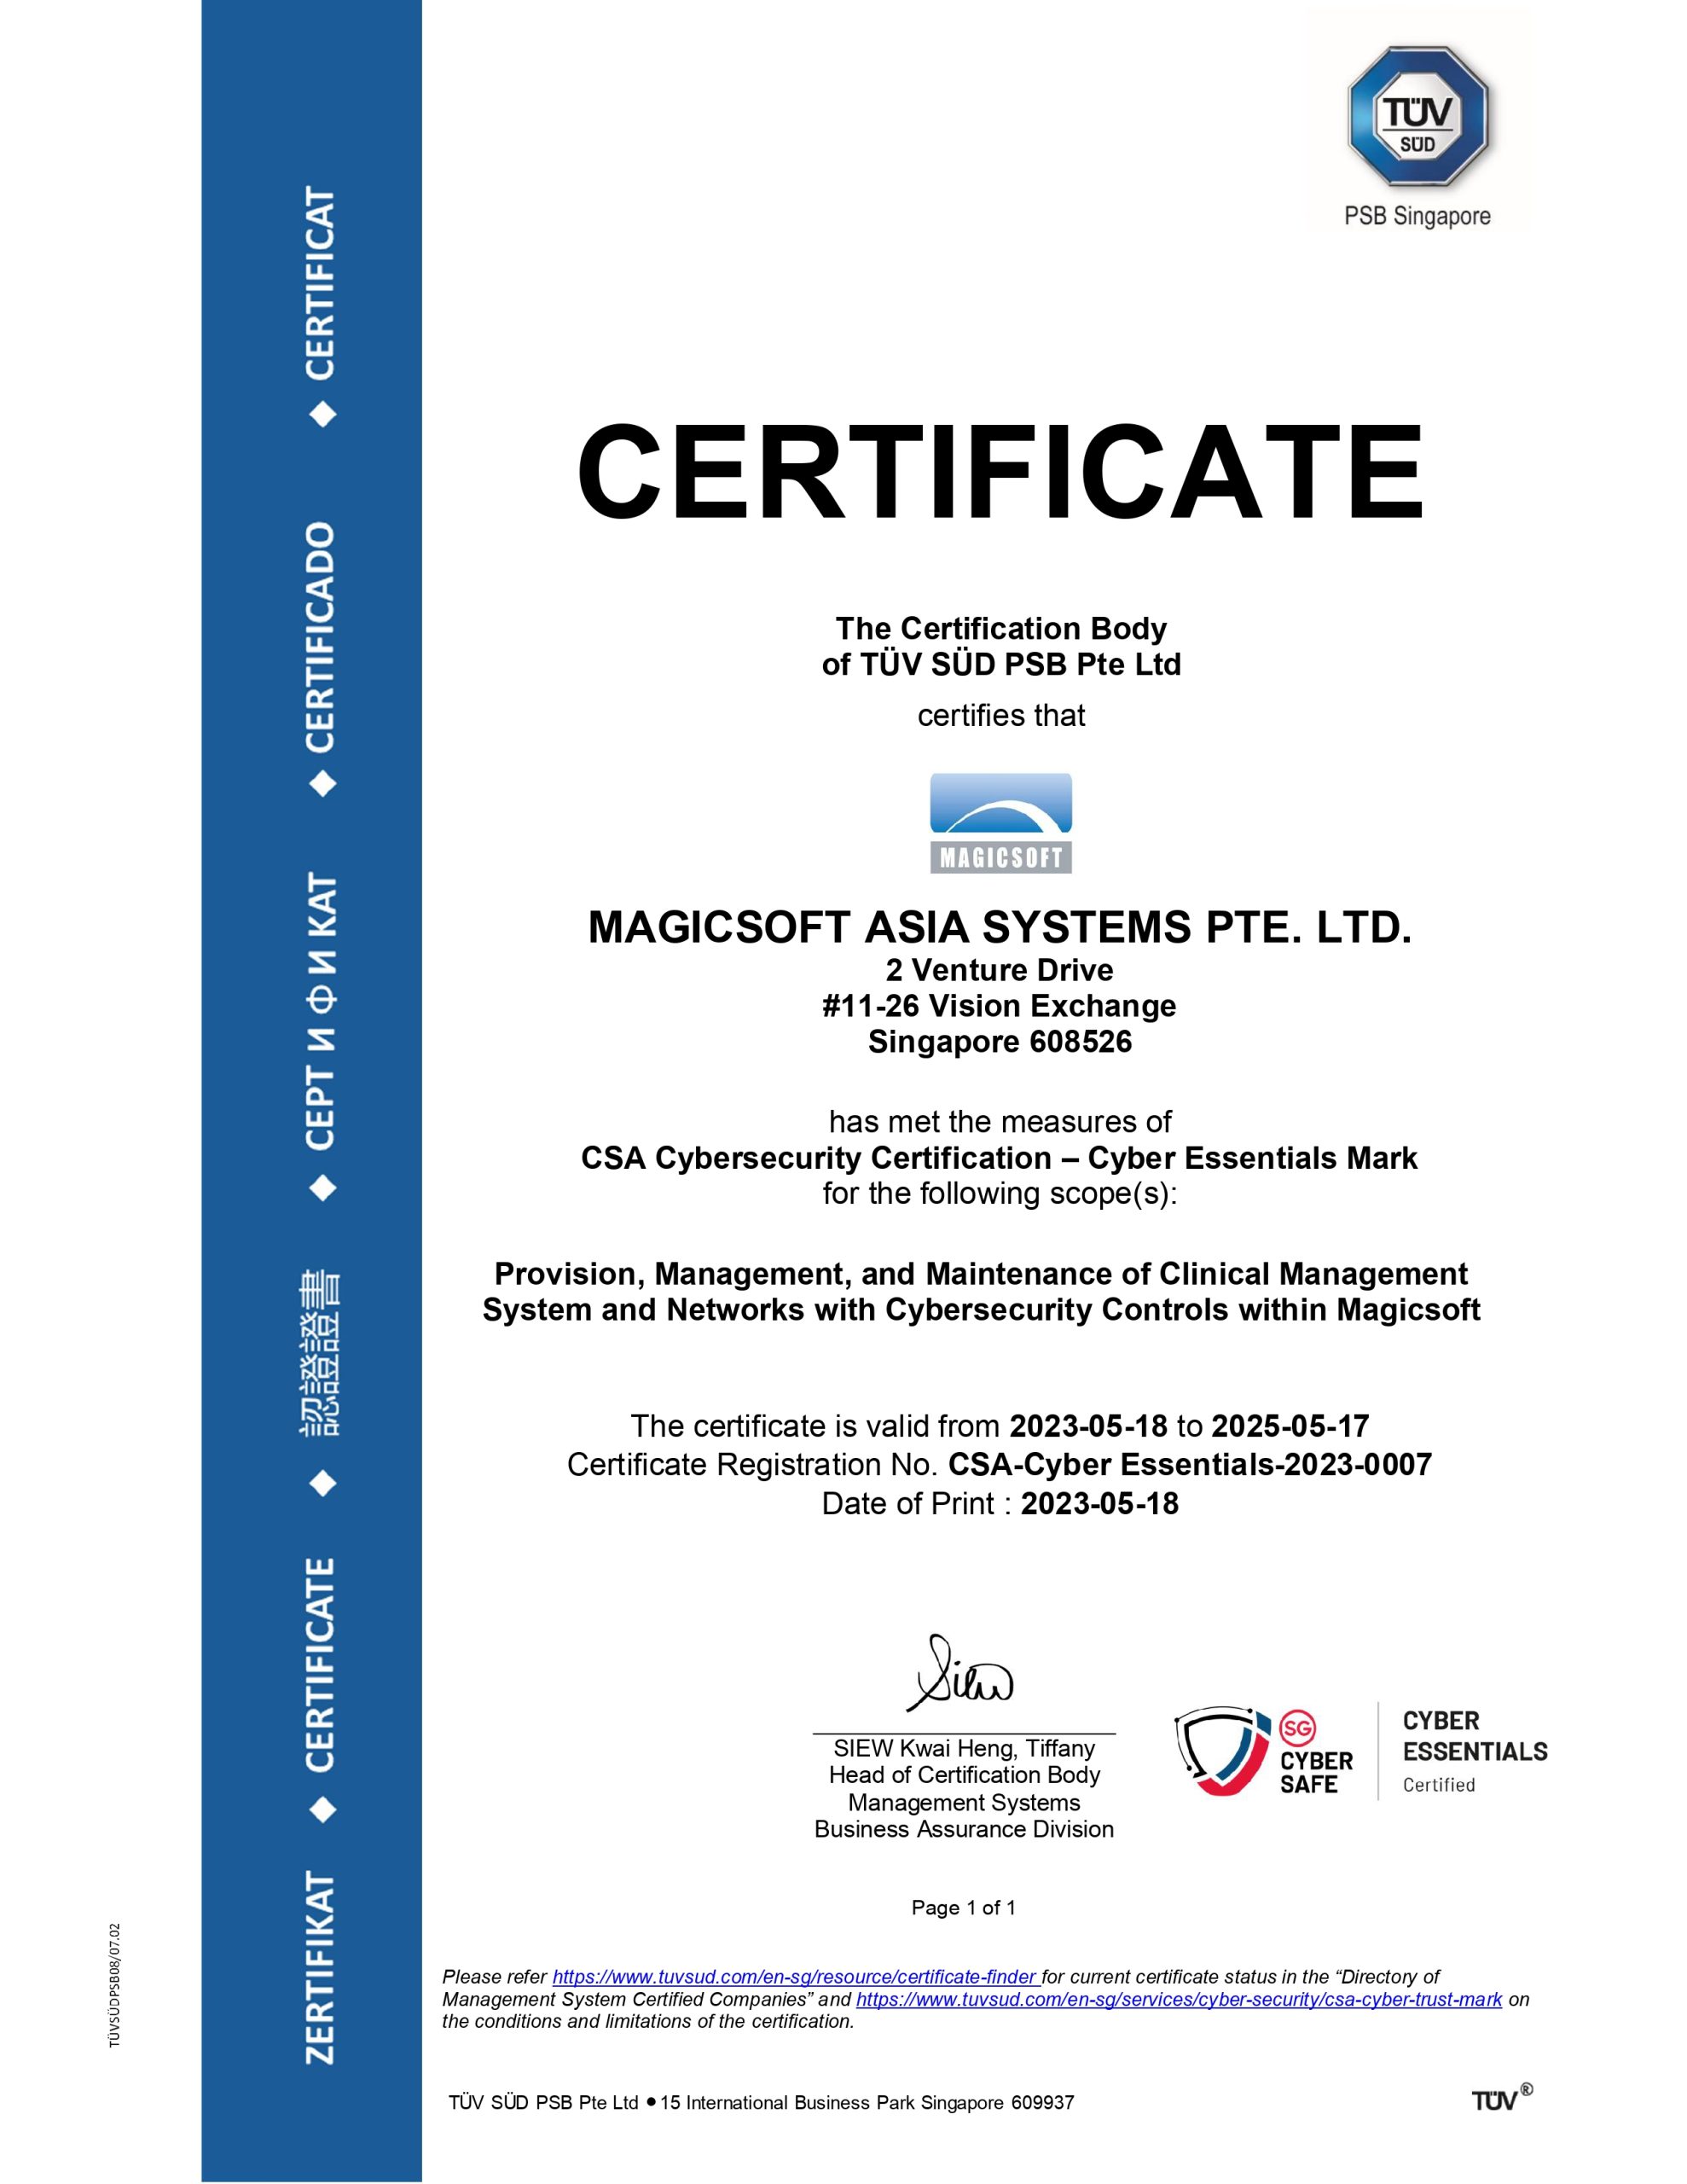 Magicsoft Asia System Cyber Security Certificate